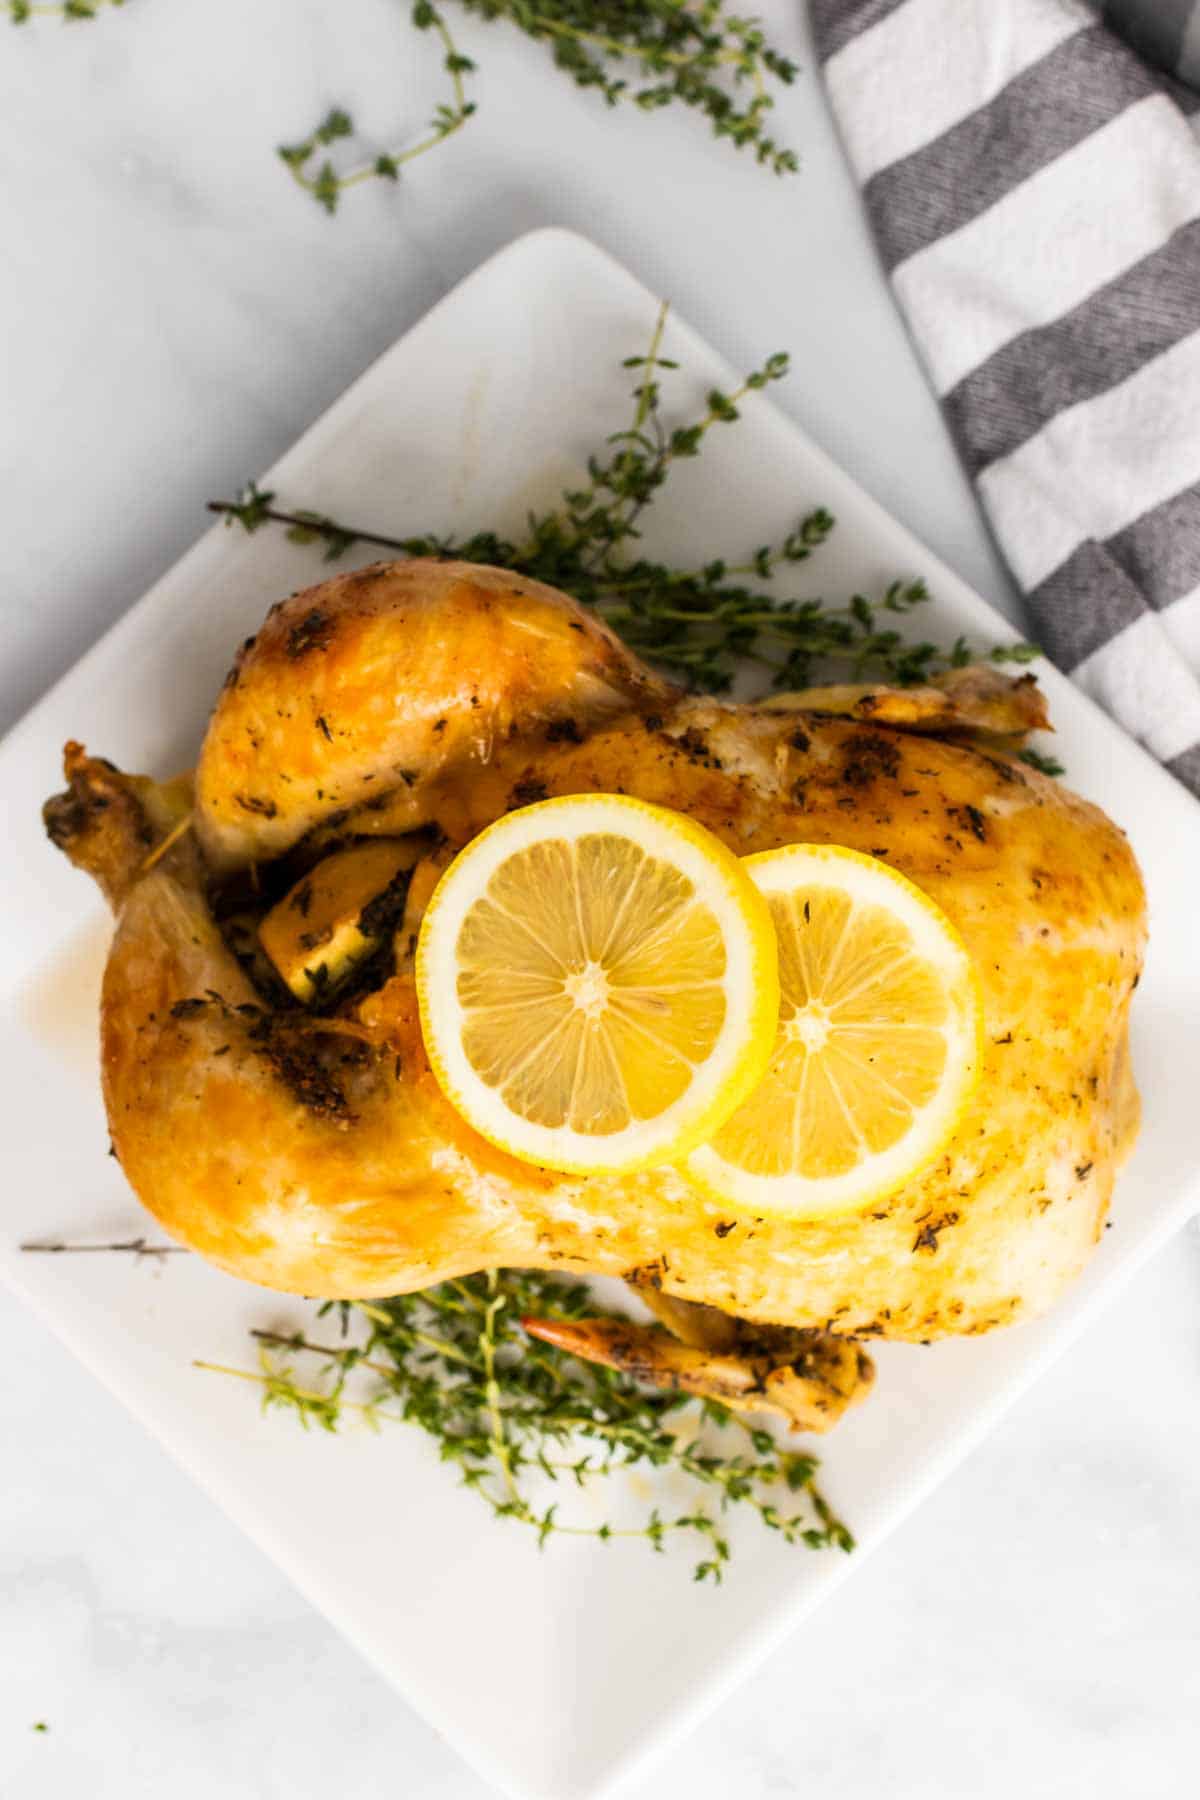 Whole chicken on a white plate next to sprigs of thyme and garnished with two lemon slices, as seen from above